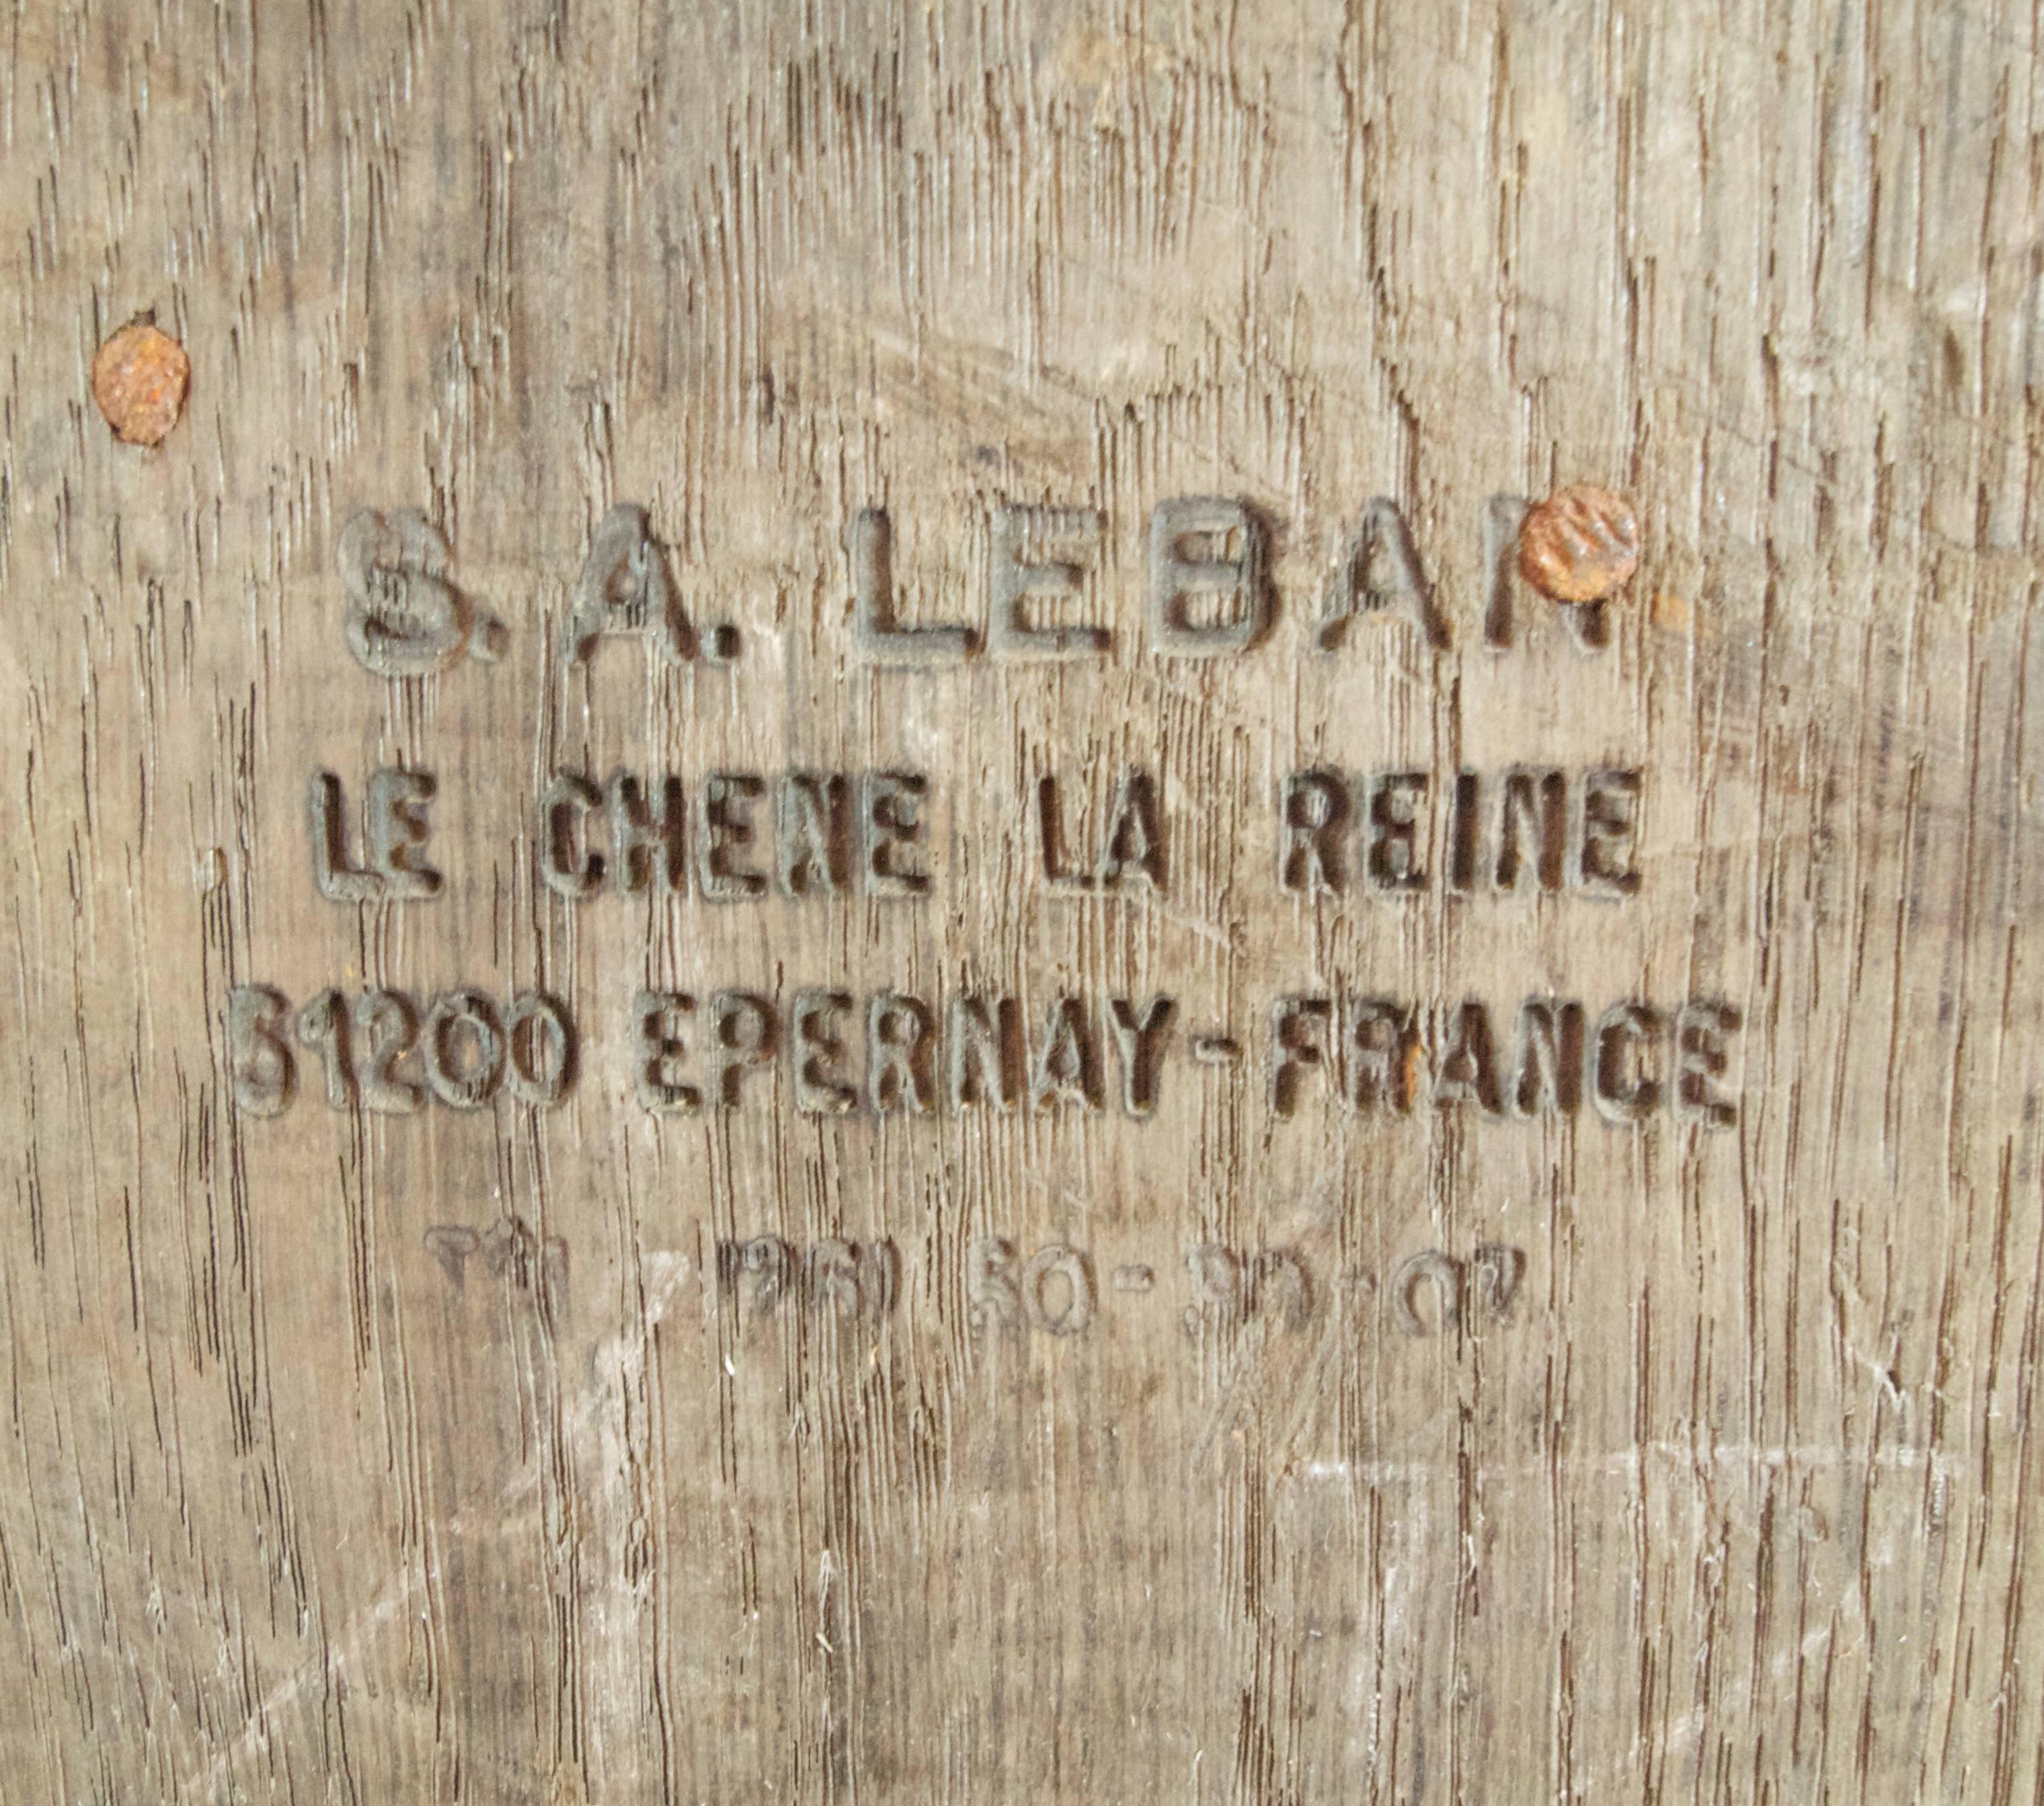 Antique oak riddling rack marked Ste Leban Epernay, France in good condition. Double side A - frame with 120 champagne bottle capacity, early 20th century.